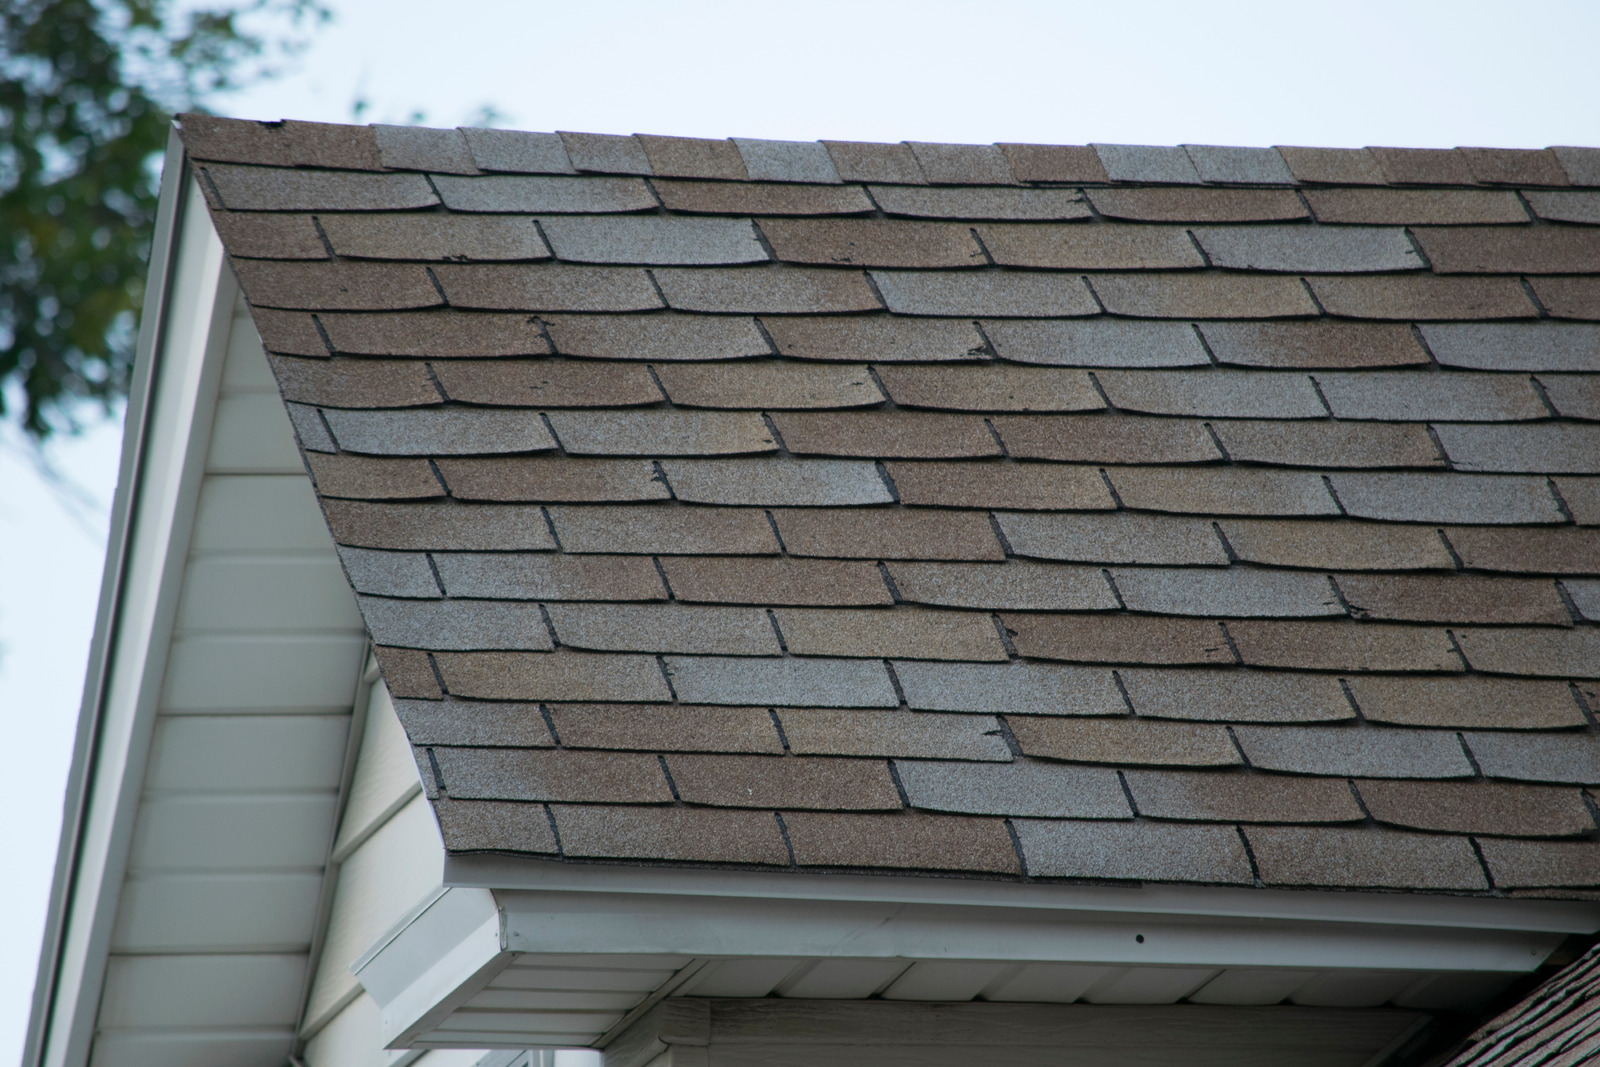 Roof of a residential house showing damage, multiple layers of shingles, missing shingles.